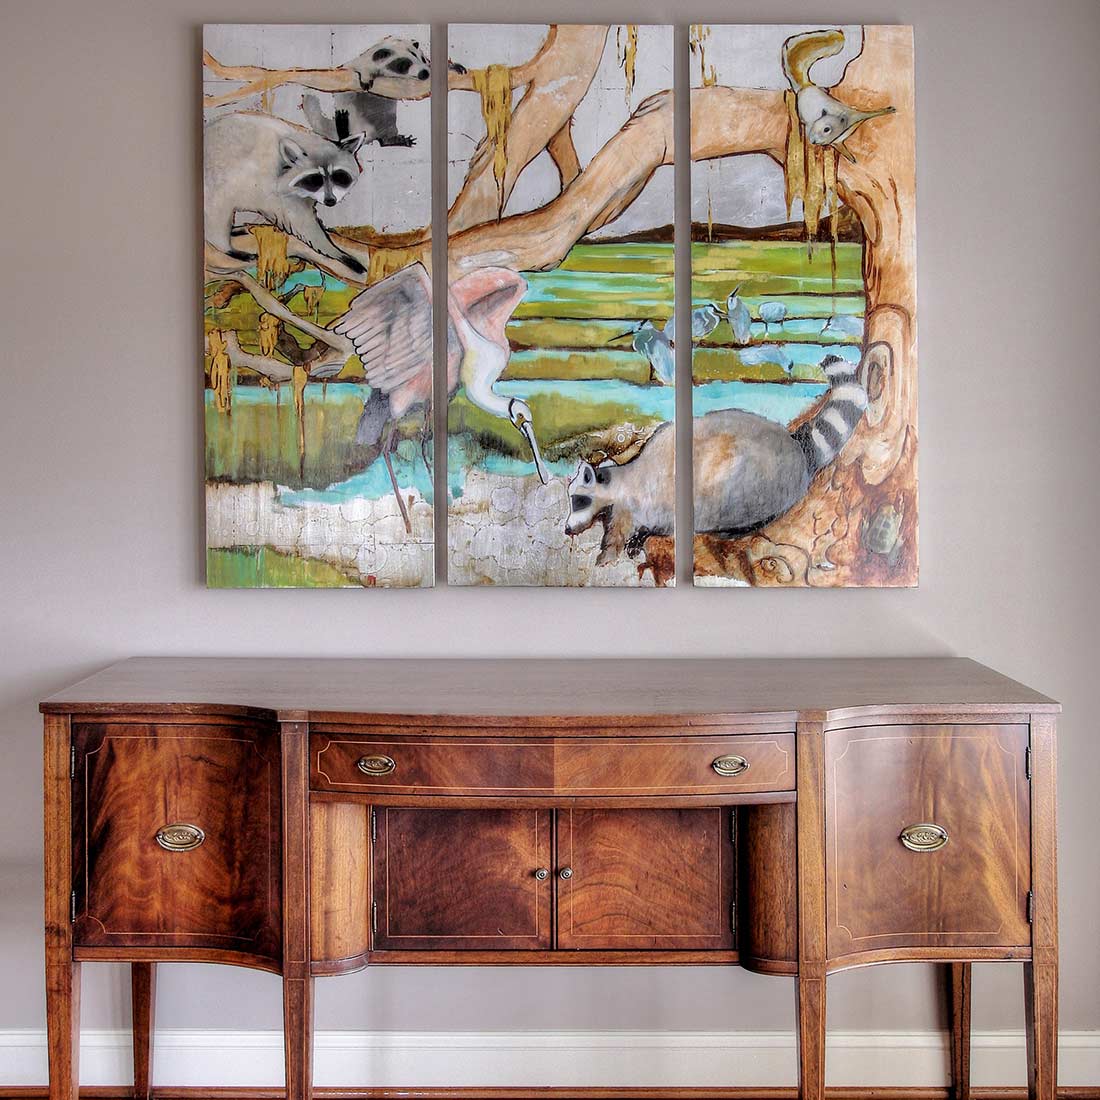 Elegant wooden sideboard with intricate veneer patterns, featuring brass handles, styled with a triptych painting above showcasing raccoons and a heron in a natural setting.